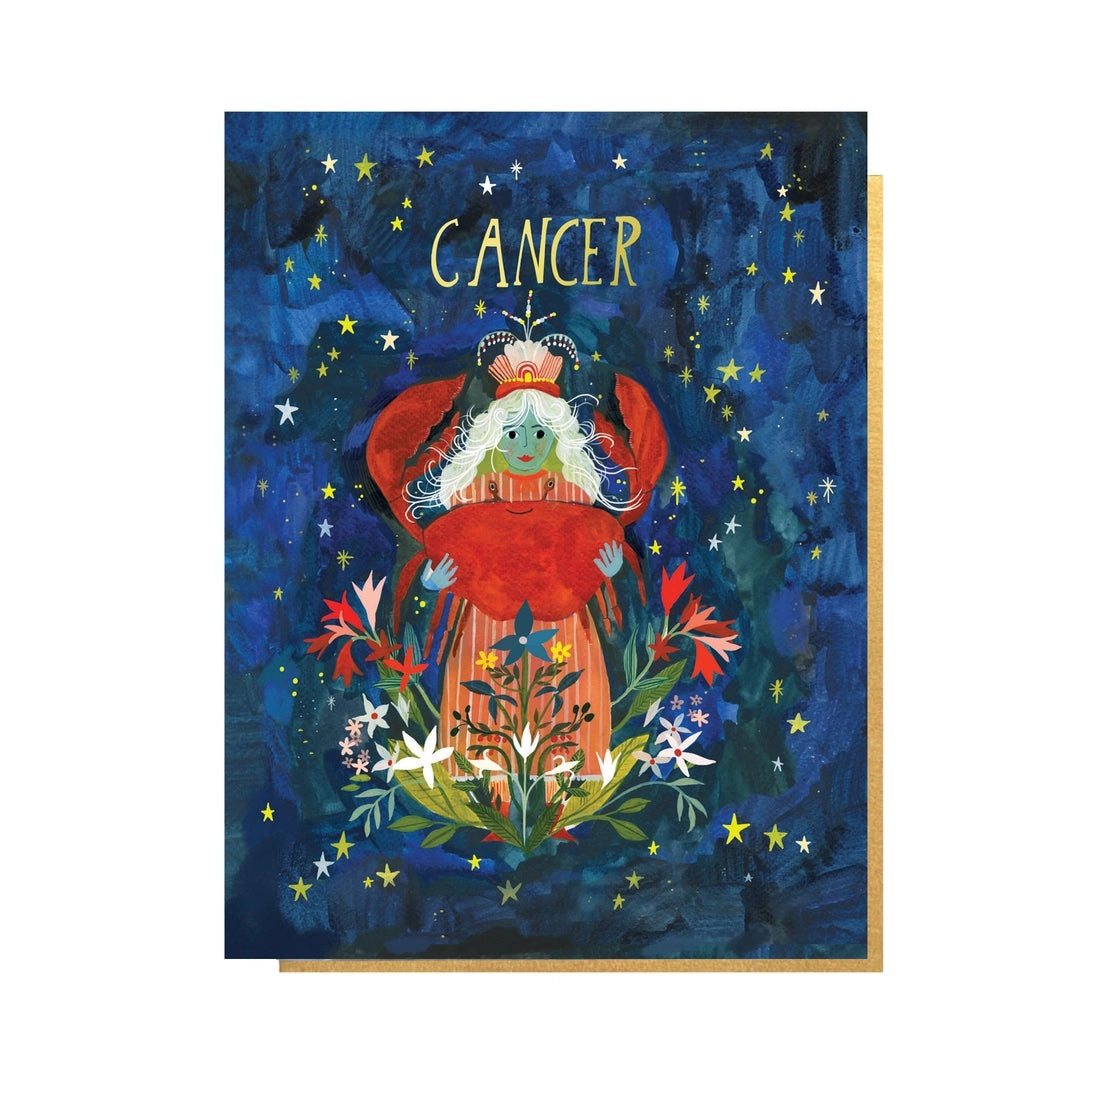 Folding card with illustration of a woman holding a large red crab in starry sky Cancer written above